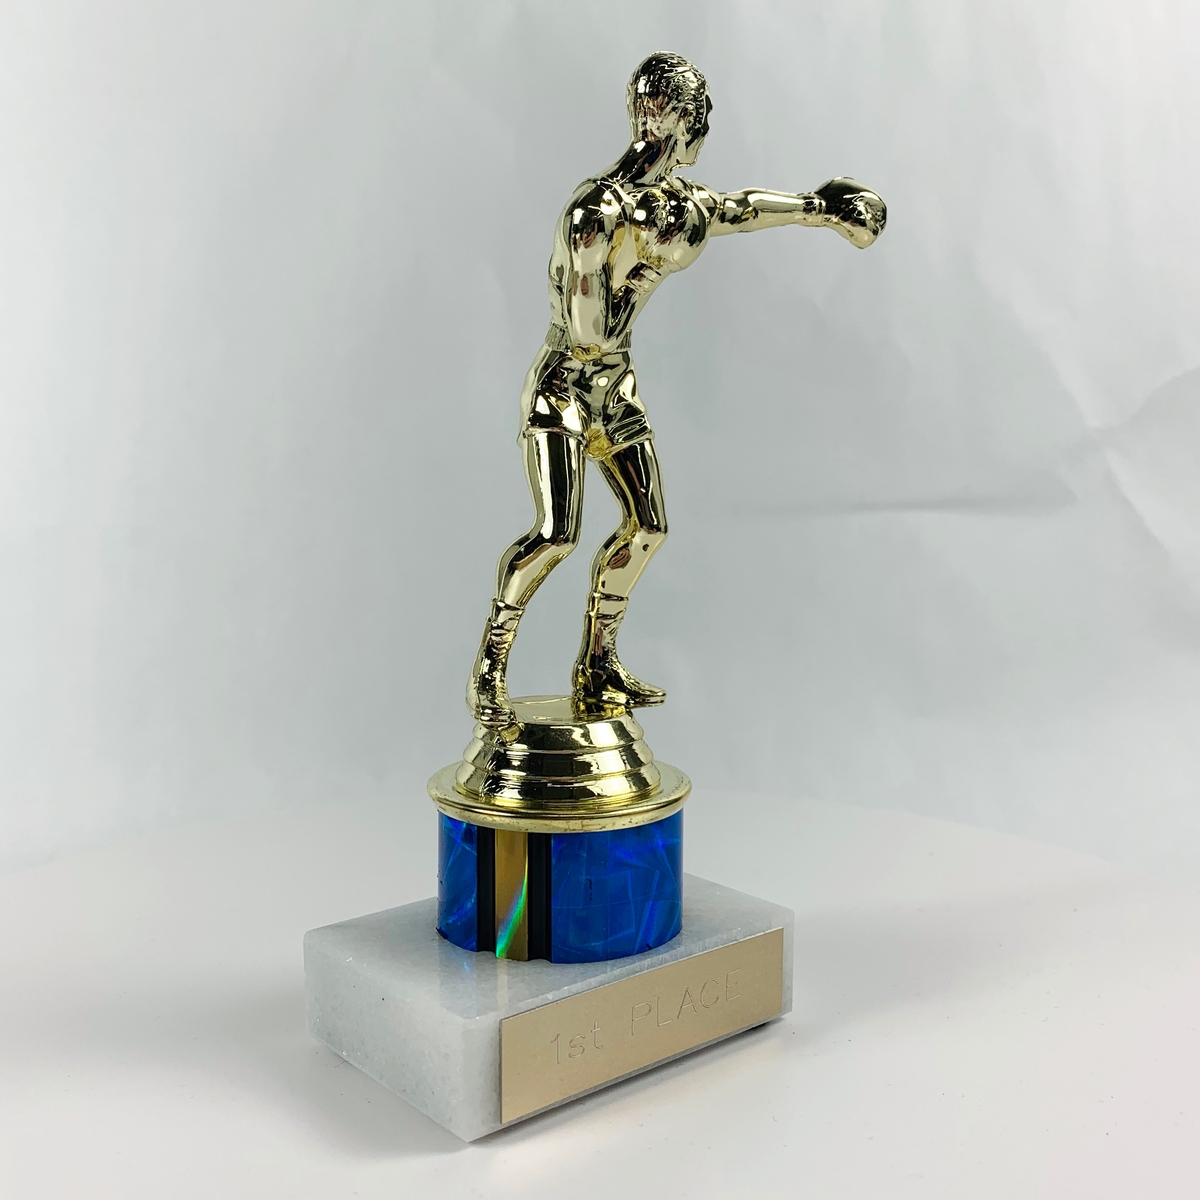 New Marble Based Boxing Trophy FREE ENGRAVING 